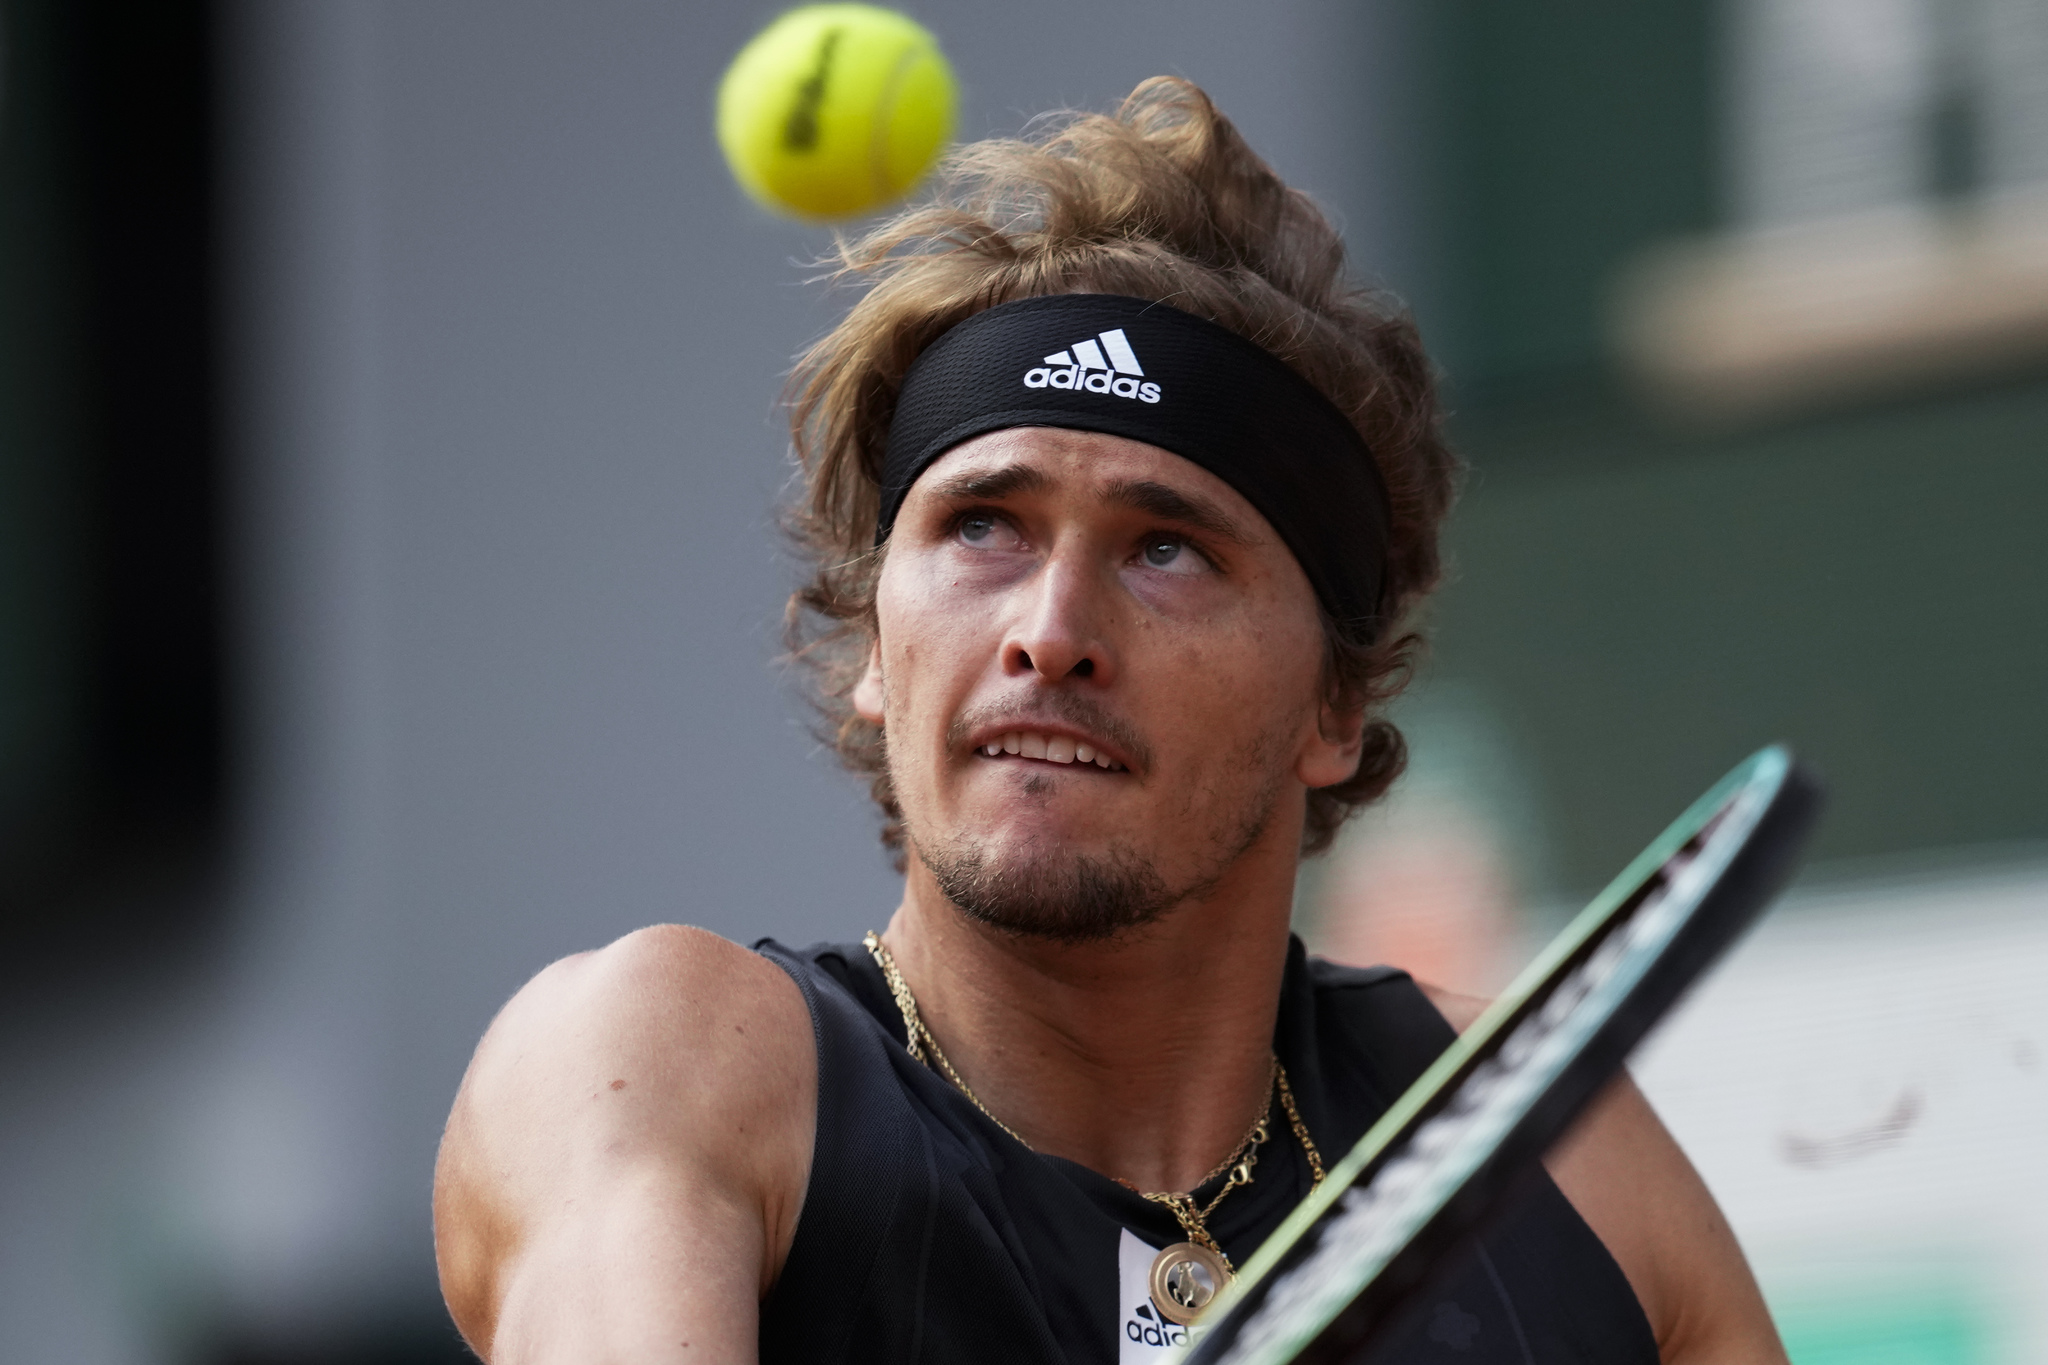 Germany's Alexander Zverev plays a shot against Spain's Carlos  lt;HIT gt;Alcaraz lt;/HIT gt; during their quarterfinal match at the French Open tennis tournament in Roland Garros stadium in Paris, France, Tuesday, May 31, 2022. (AP Photo/Christophe Ena)